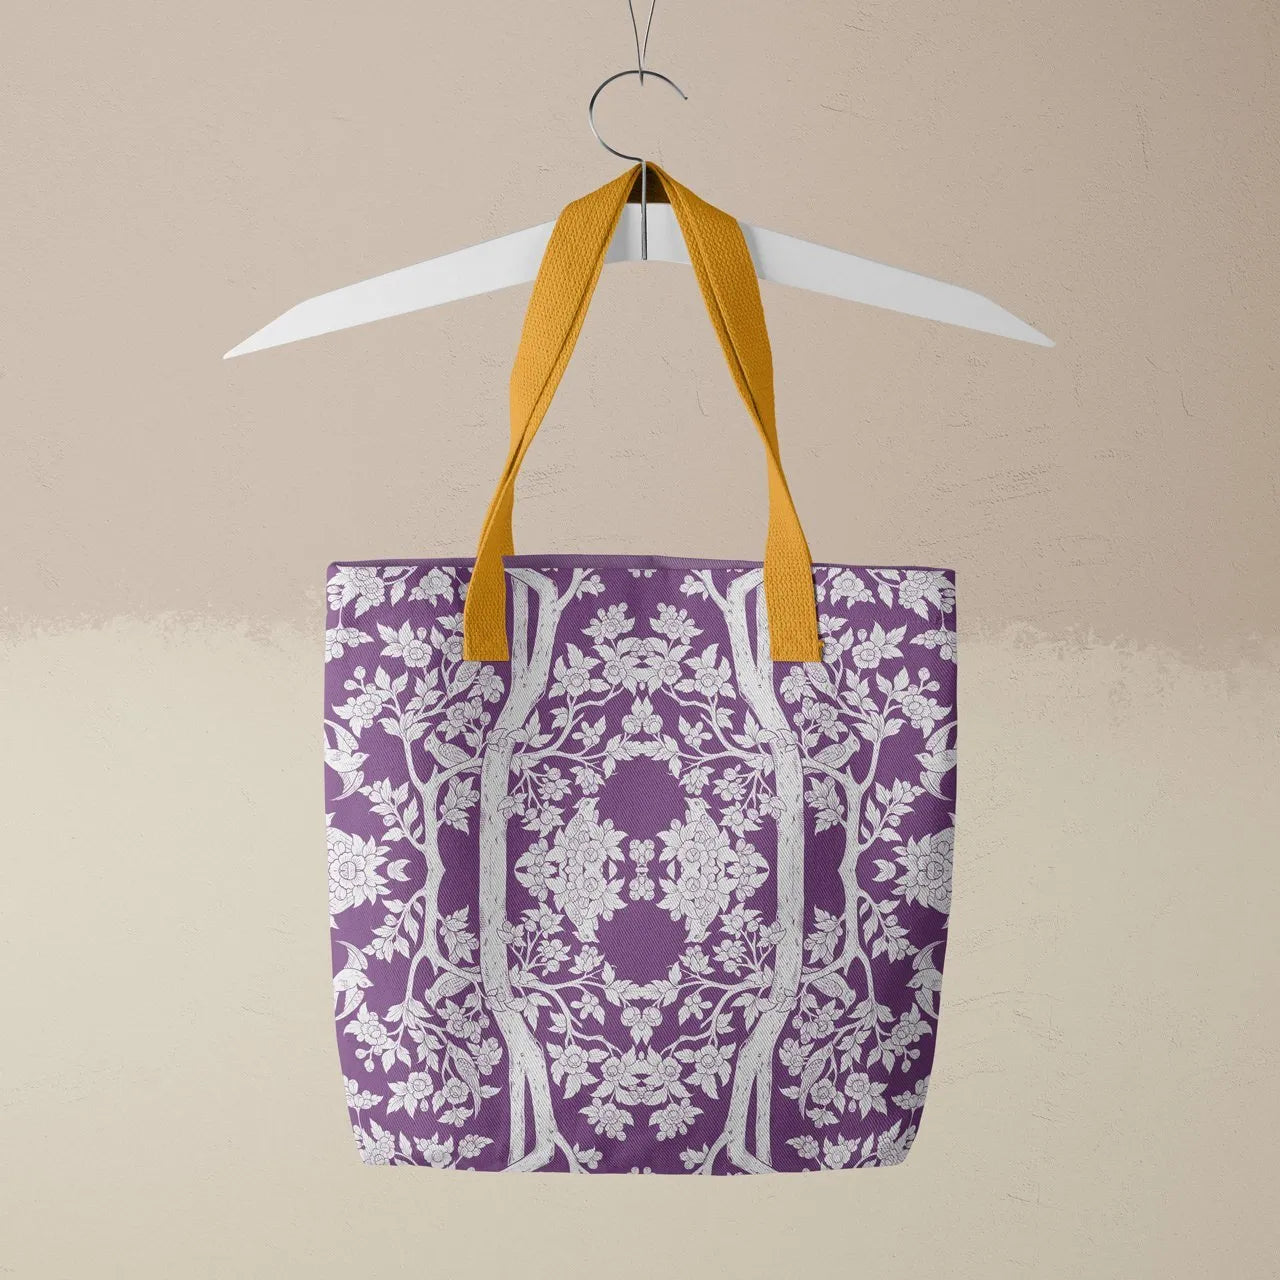 Aviary Tote - Purple Finch - Heavy Duty Reusable Grocery Bag - Shopping Totes - Aesthetic Art